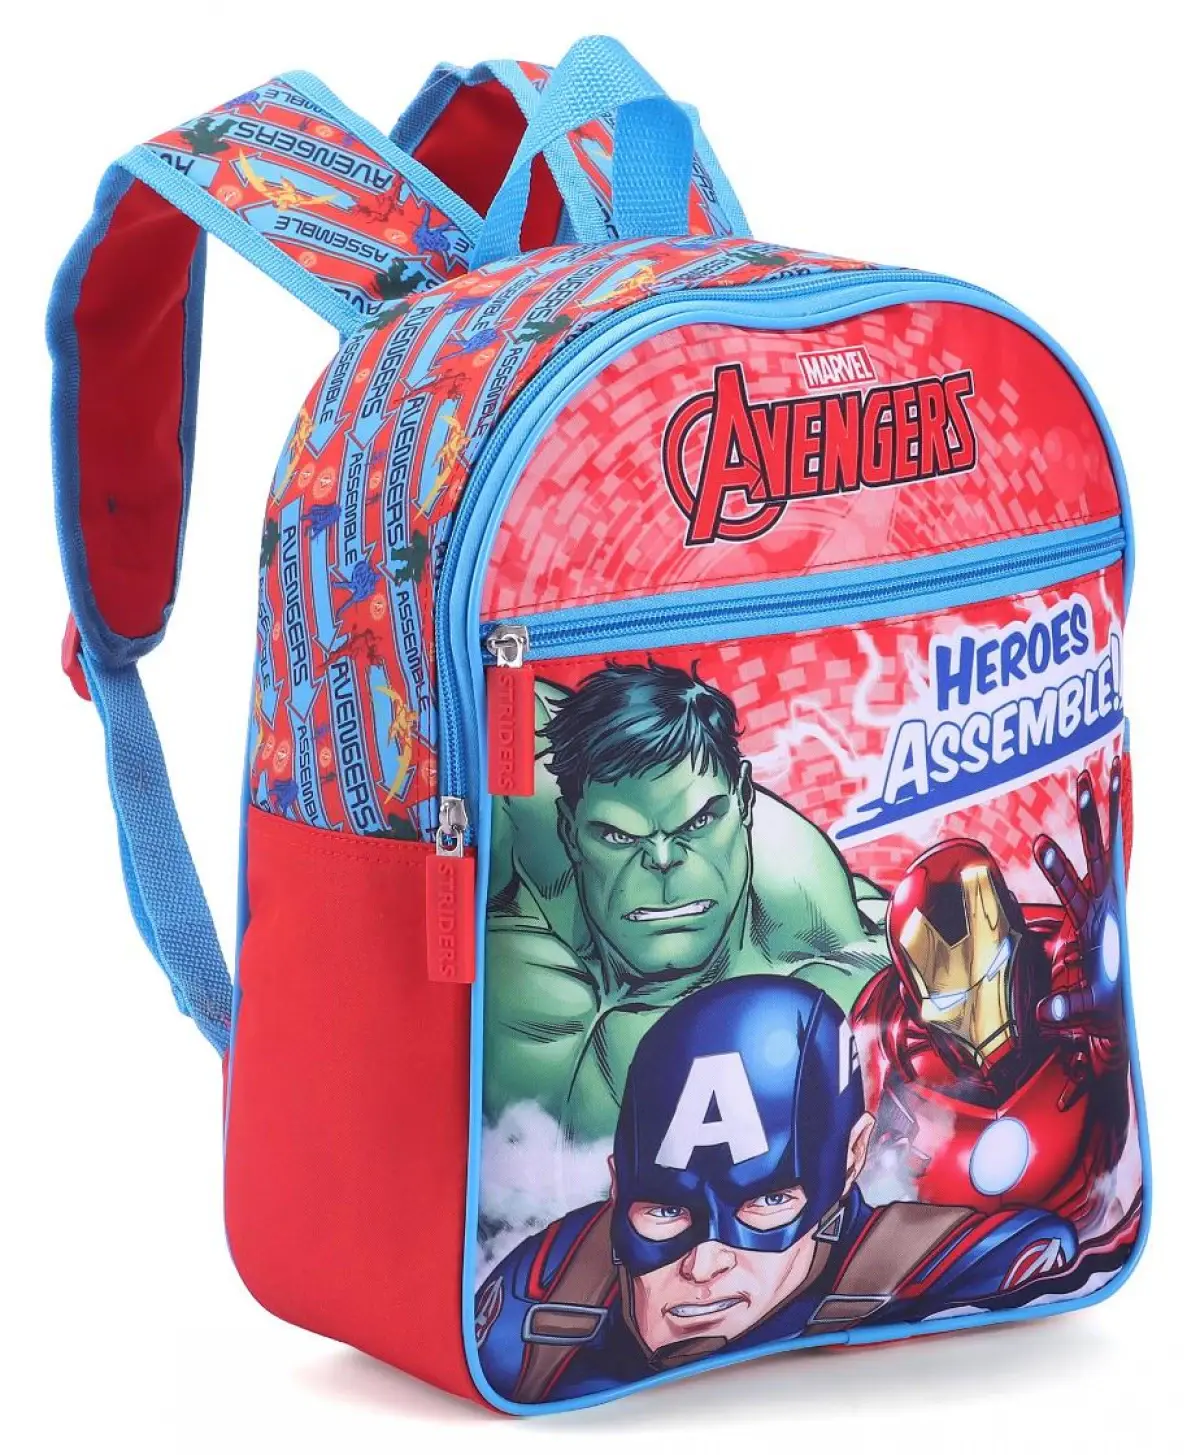 Striders 13 inches Avengers School Bag A Playful Companion for School Days Multicolor For Kids Ages 2Y+